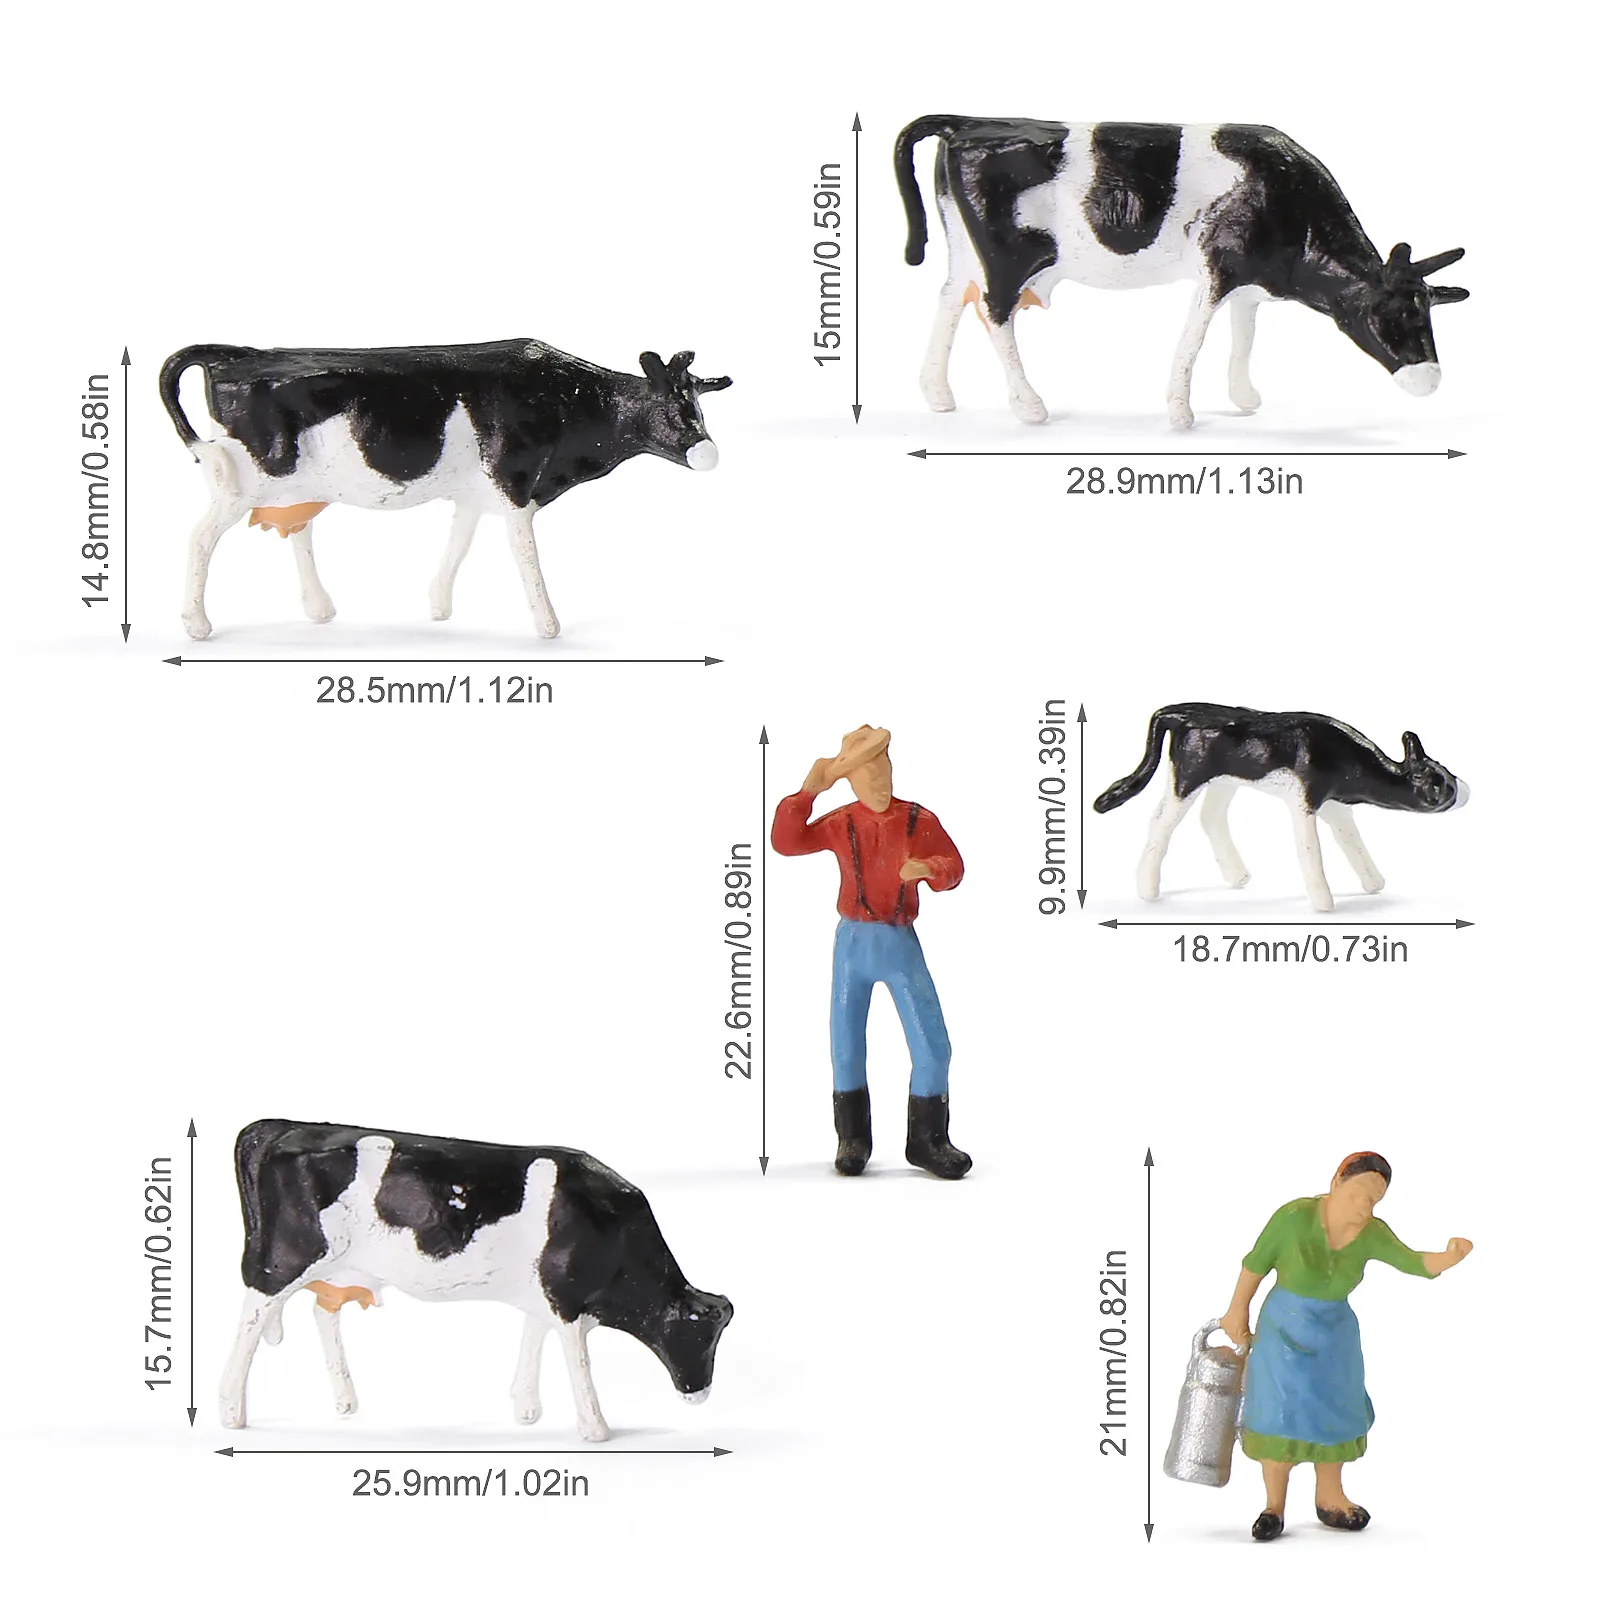 

AN8720 Model Train Railway Painted Herder Farm Animals HO Scale 1:87 Model Black White Cows